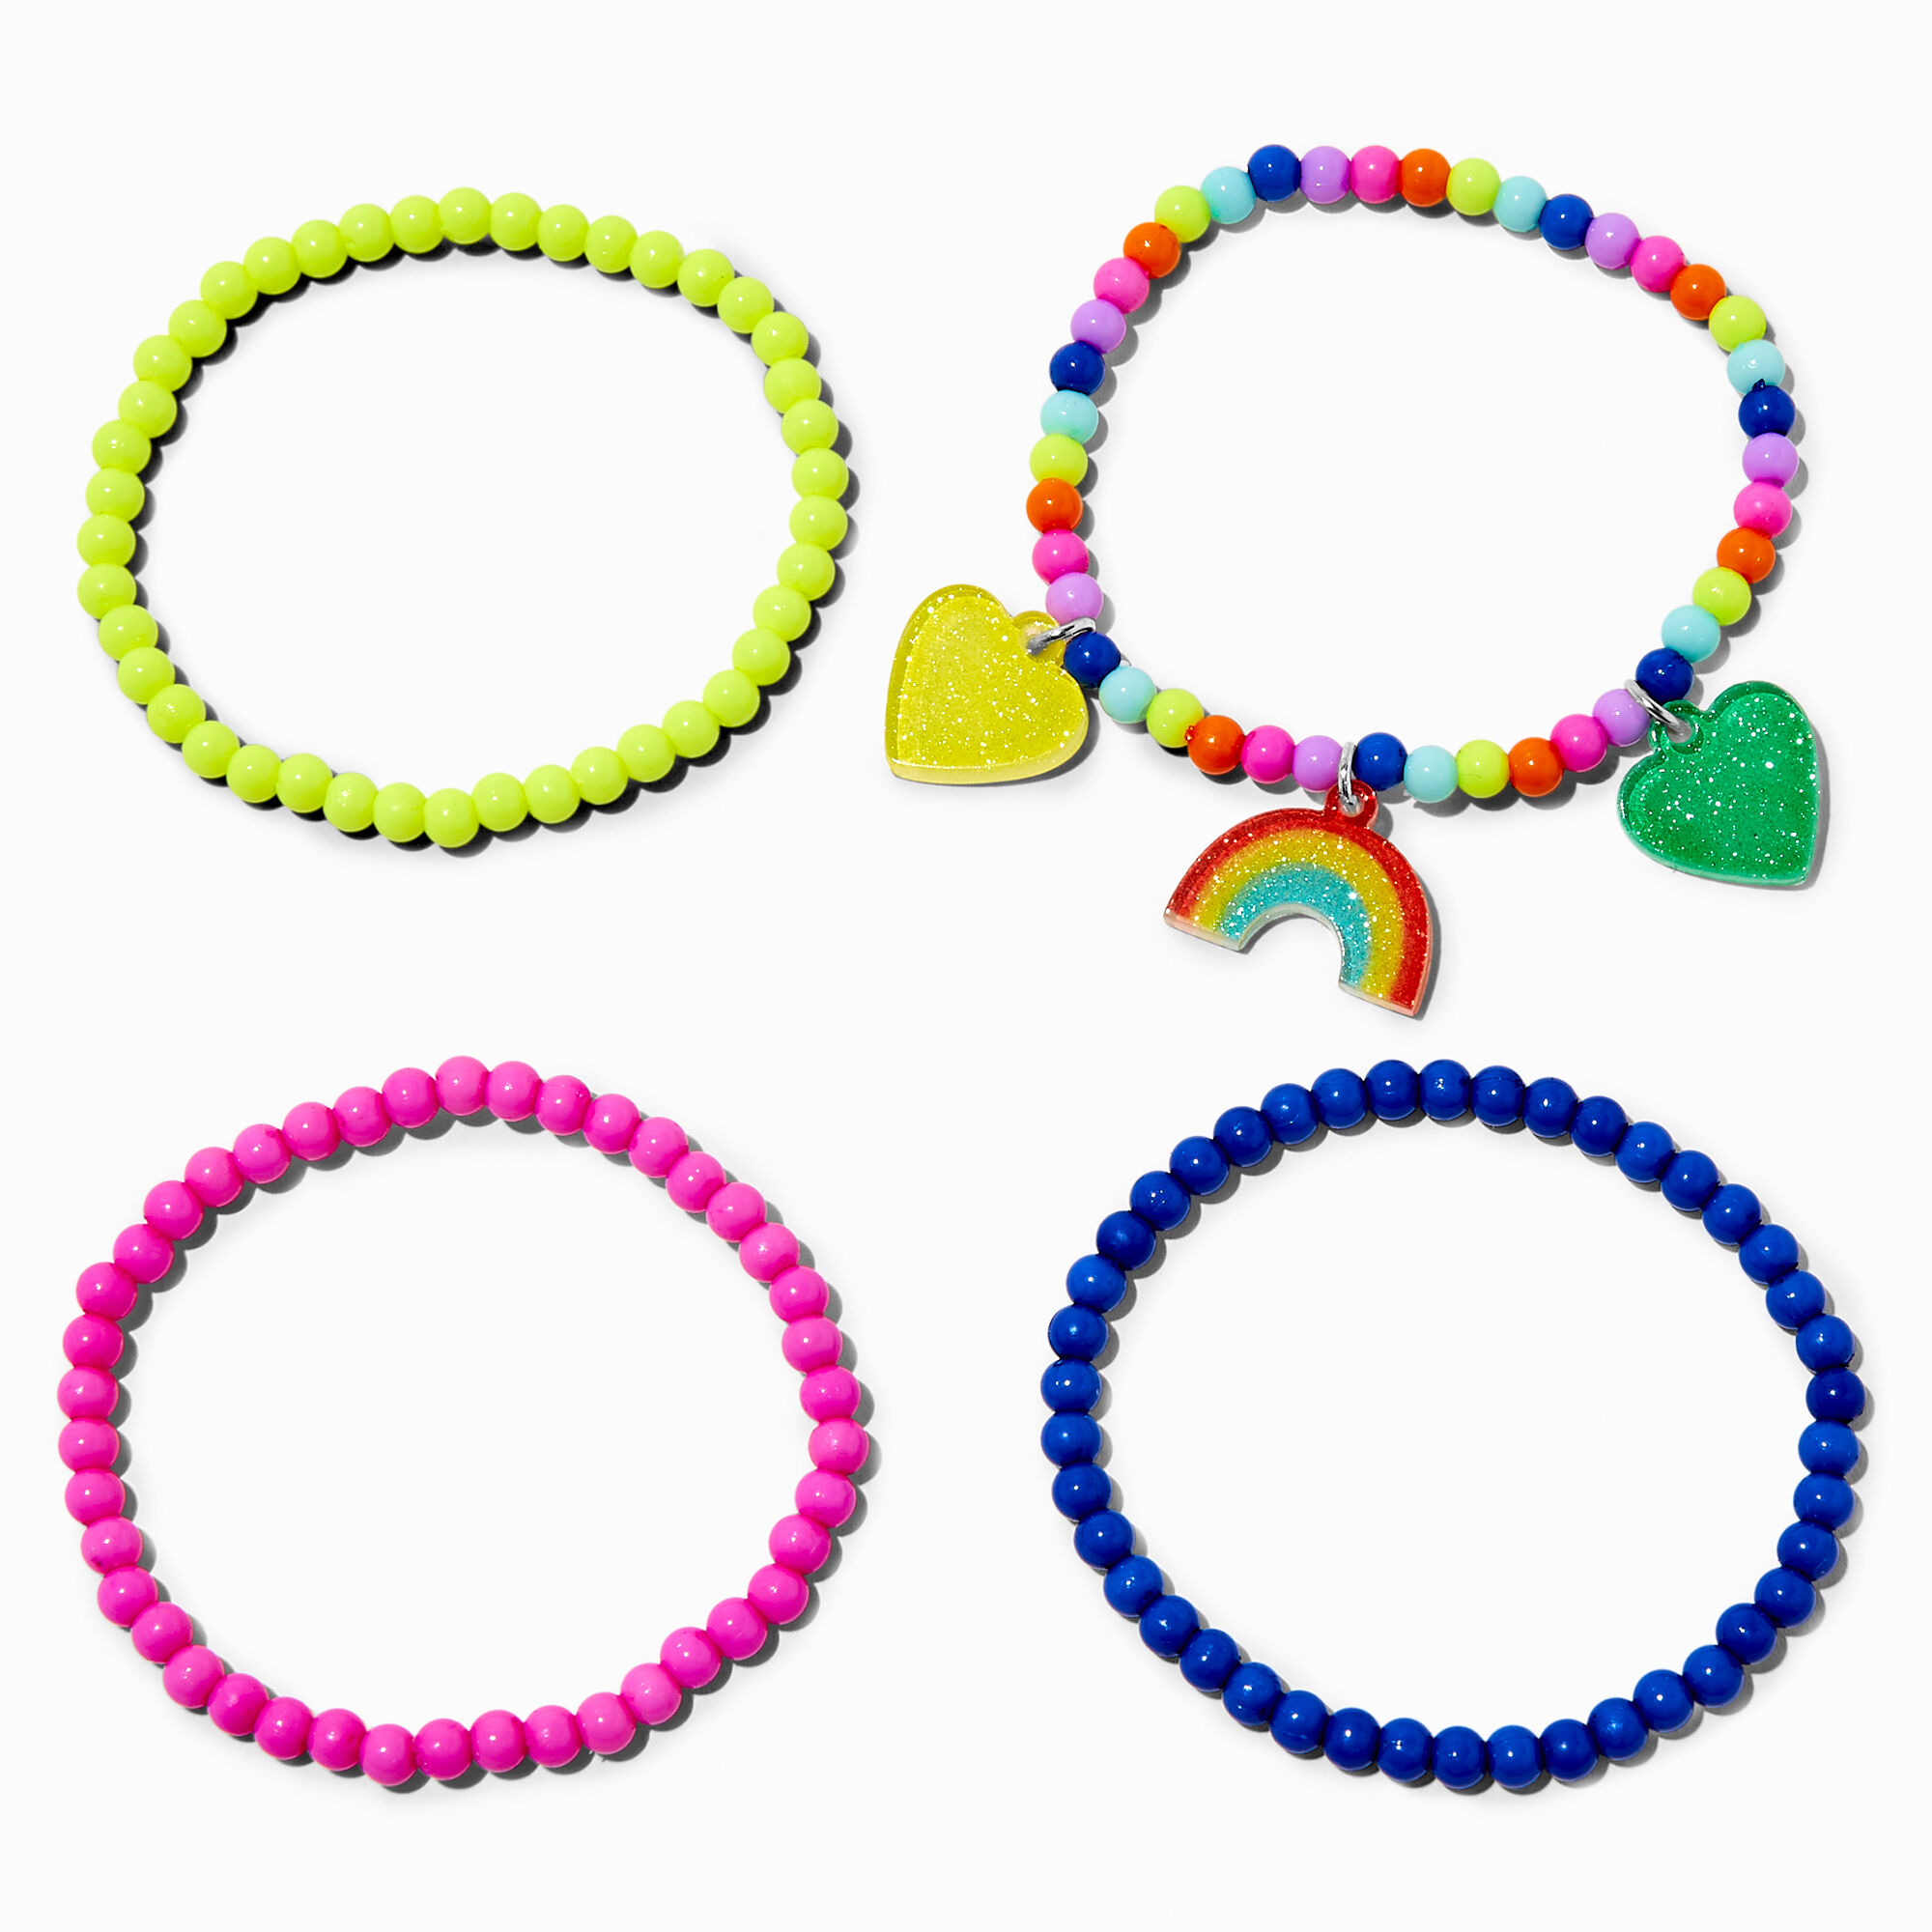 View Claires Club Seed Bead Stretch Bracelets 4 Pack Rainbow information